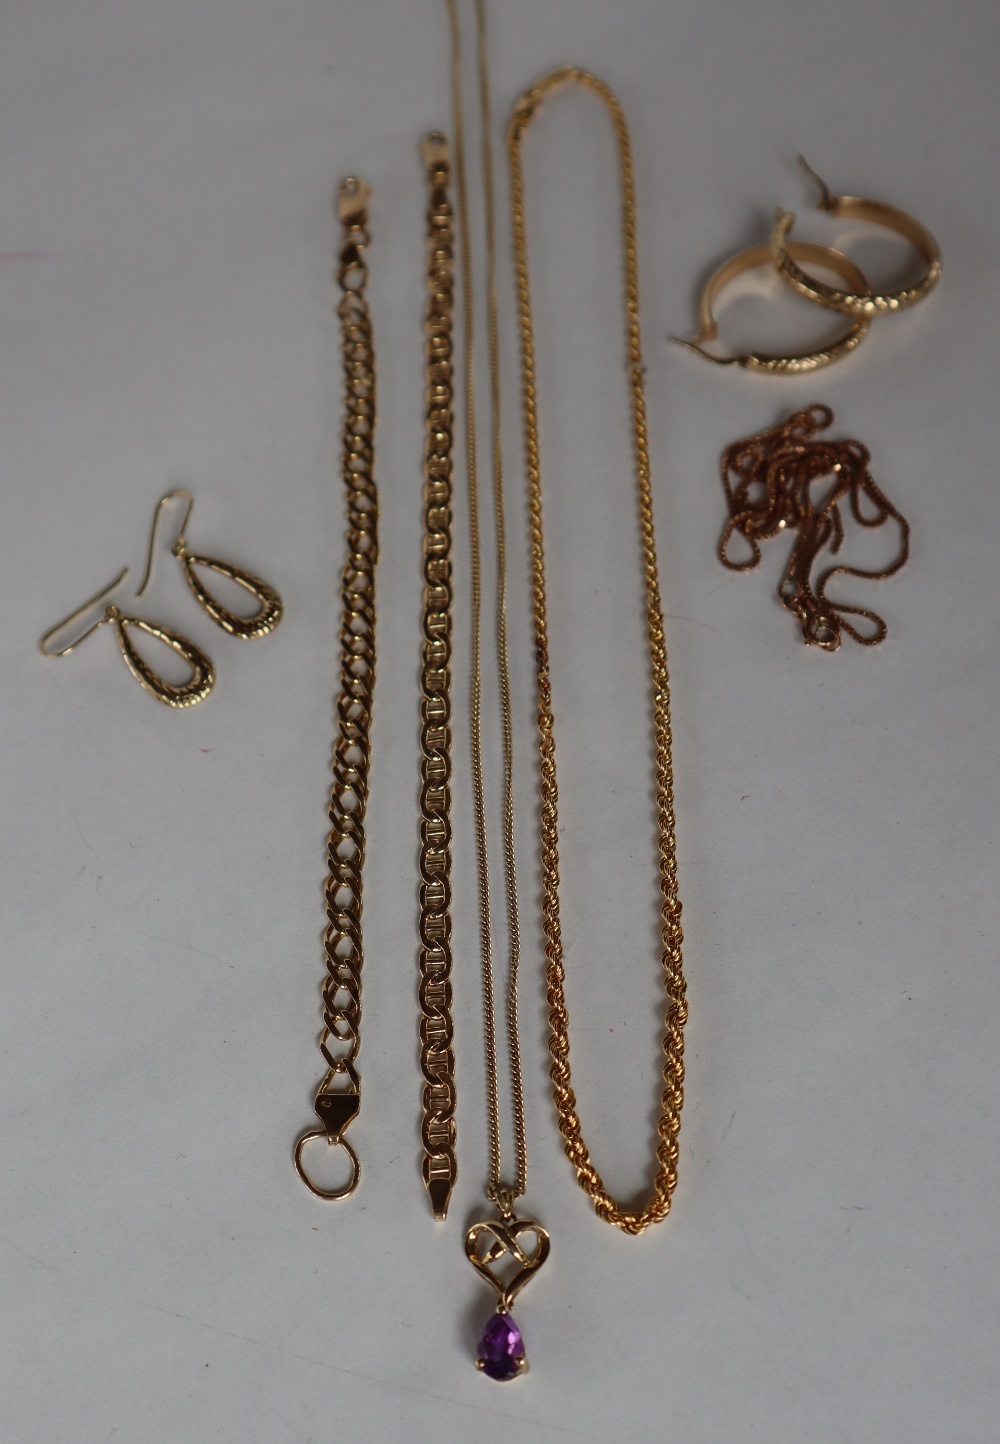 Two 9ct gold bracelets together with 9ct gold necklaces, earrings and pendant, - Image 2 of 3